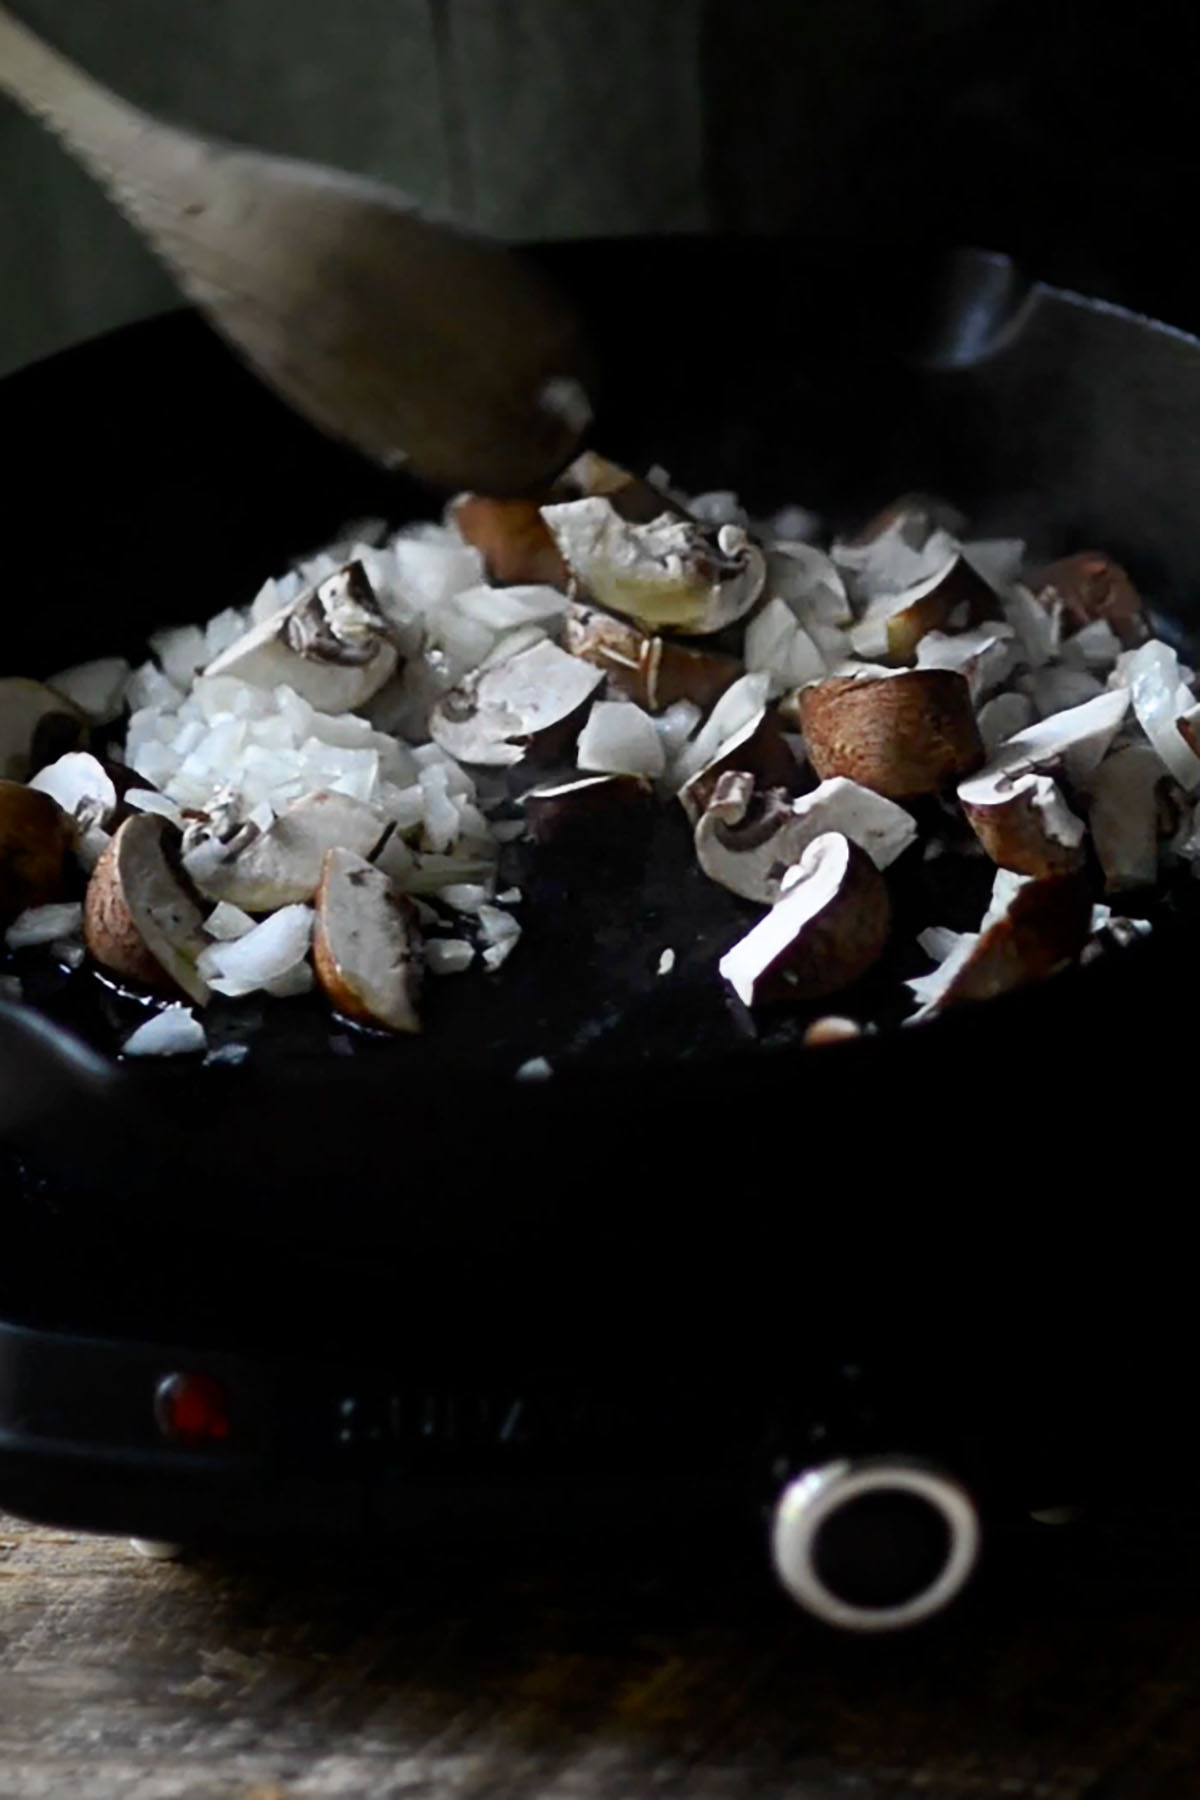 Diced onions and mushrooms sautéing in a cast iron skillet.